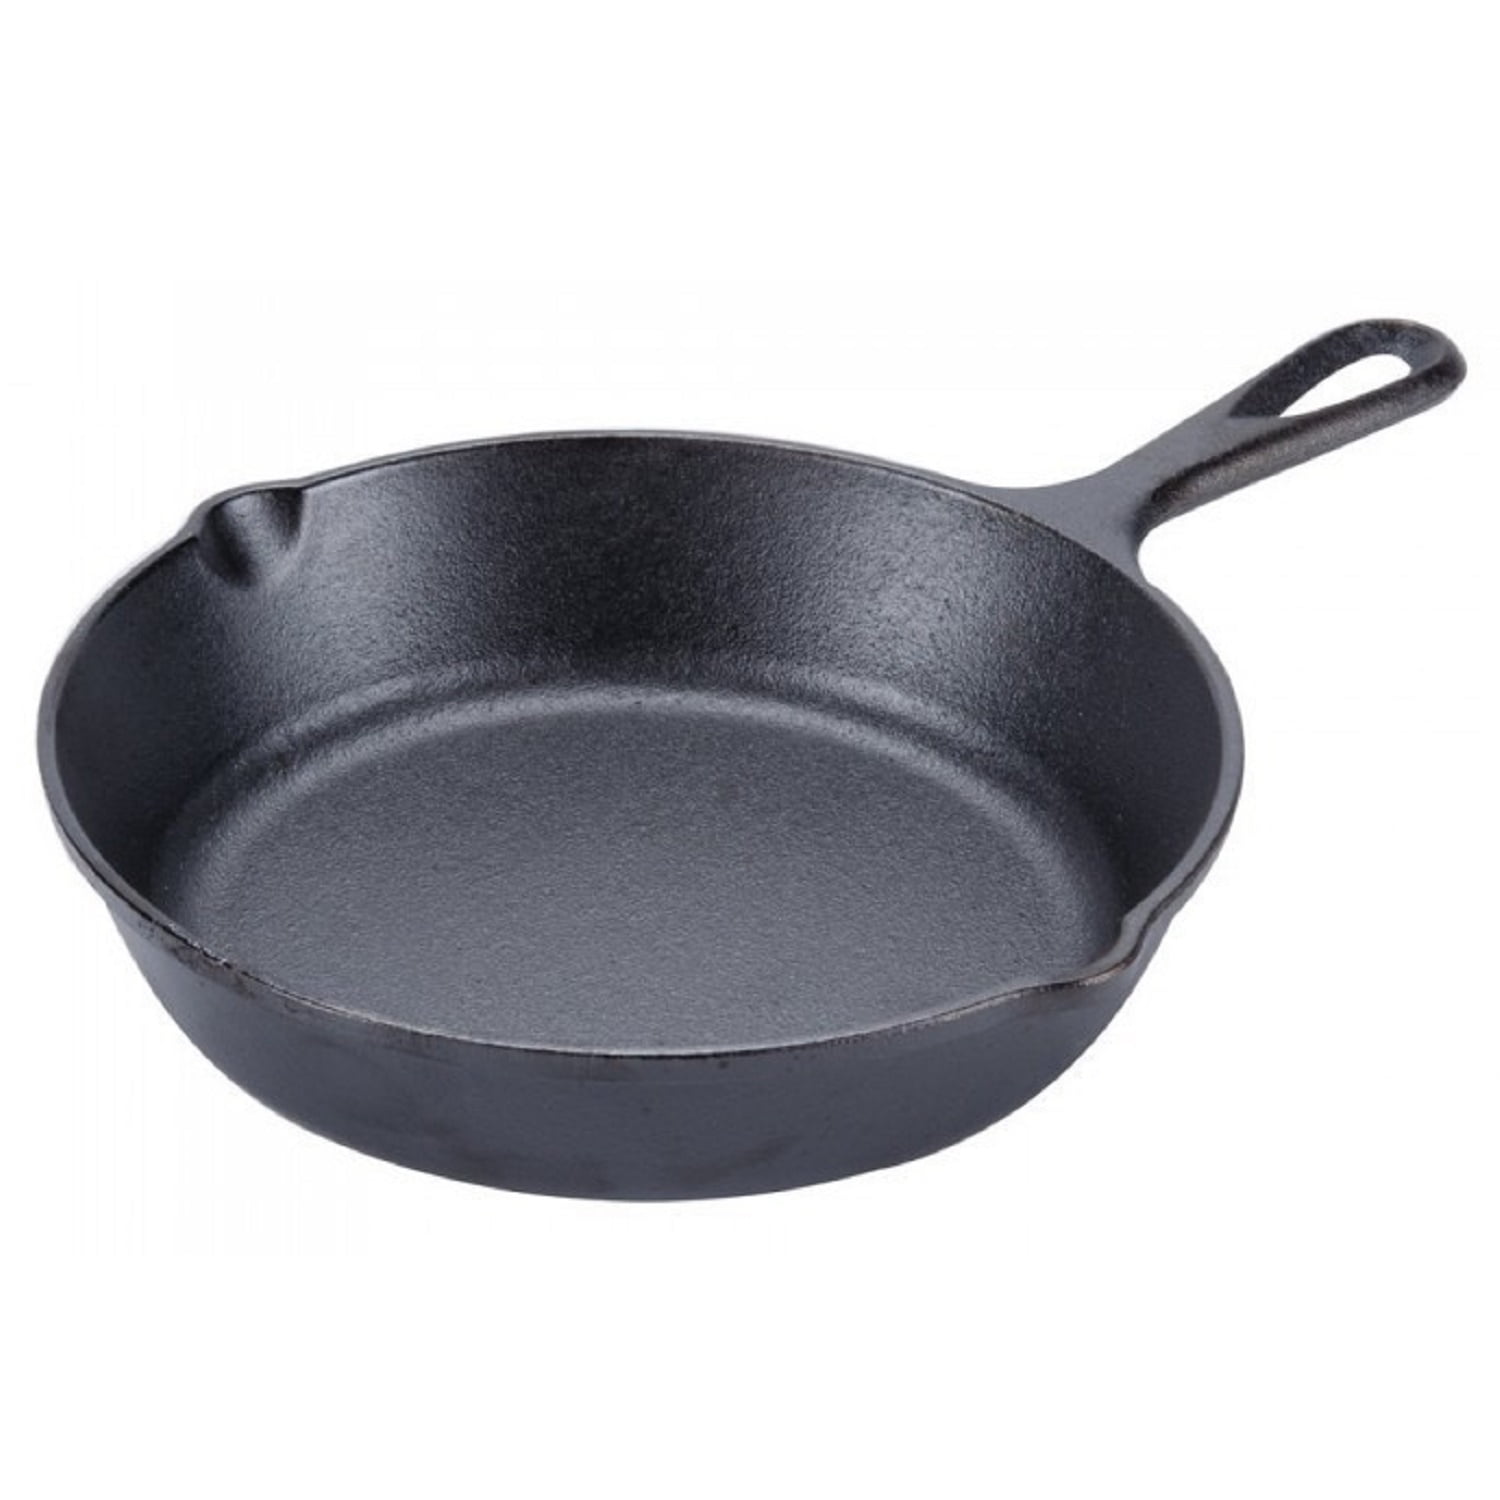 MEIGUI Nonstick Frying Pan Skillet, 6 Inch Large Cast Iron Skillet, Premium  Pre-Seasoned Like Surface for Cookware Oven/Broiler/Grill Safe, Kitchen